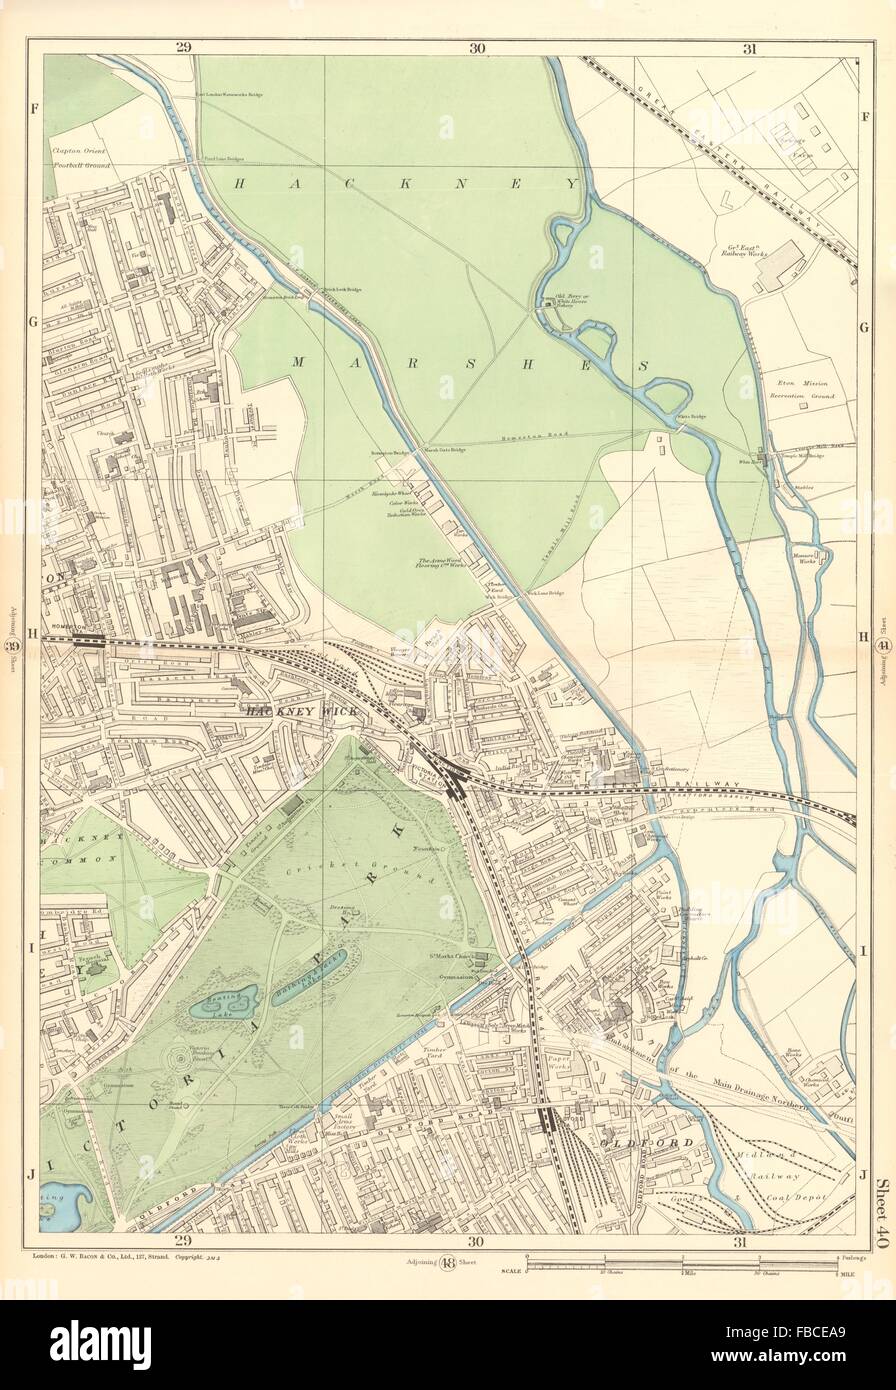 HACKNEY WICK/Marshes Victoria Park Old Ford Homerton Clapton Leyton, 1903 map Stock Photo